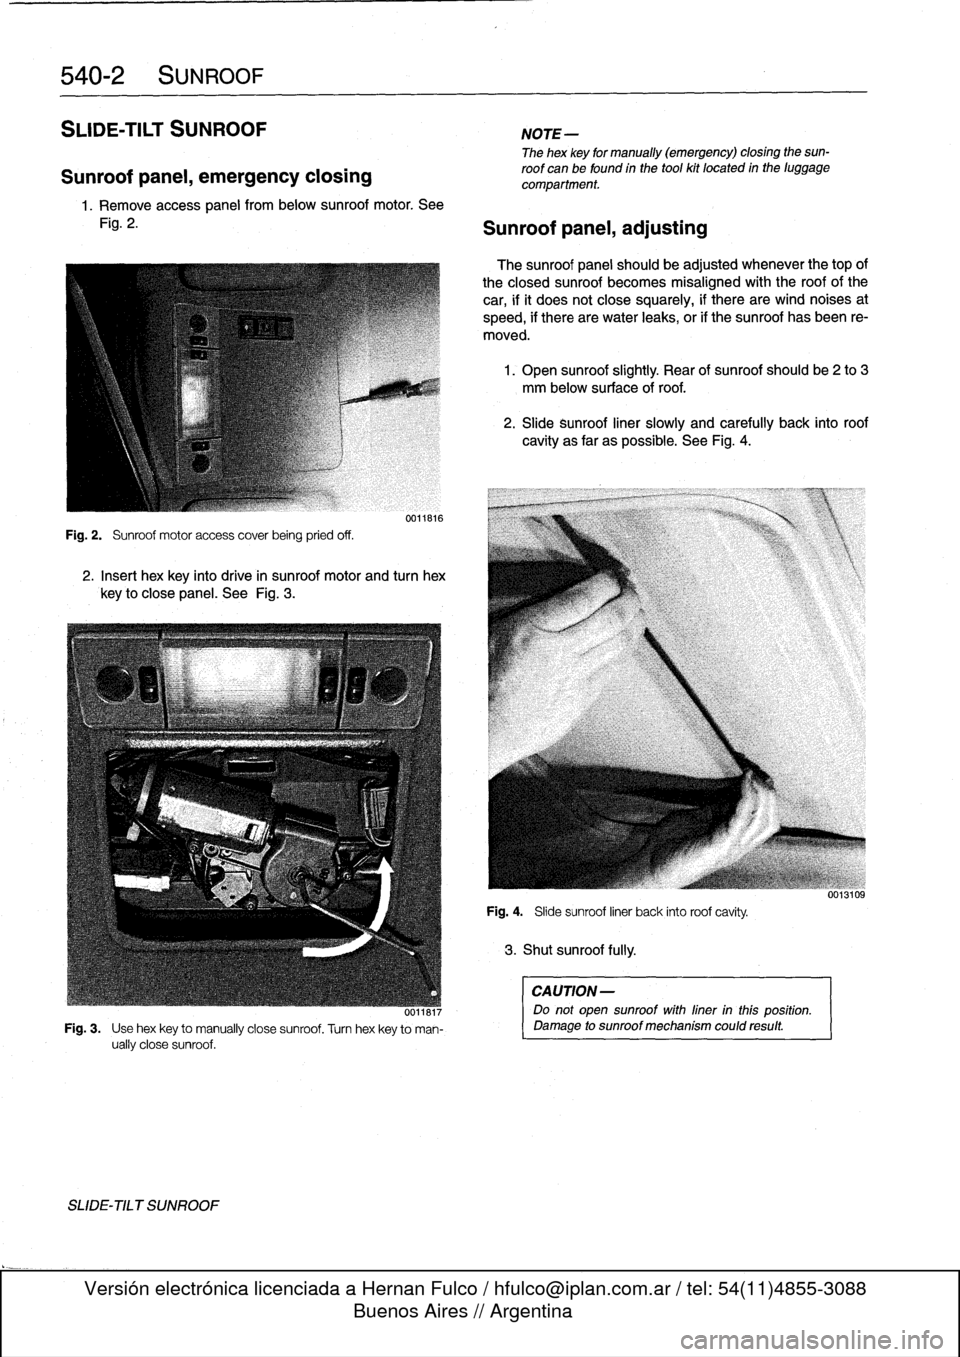 BMW M3 1993 E36 Workshop Manual 
540-2
SUNROOF

SLIDE-TILT
SUNROOF

Sunroof
panel,
emergency
closing

1.
Remove
access
panel
frombelow
sunroof
motor
.
See

Fig
.
2
.

Fig
.
2
.

	

Sunroof
motor
access
coverbeing
pried
off
.

001181